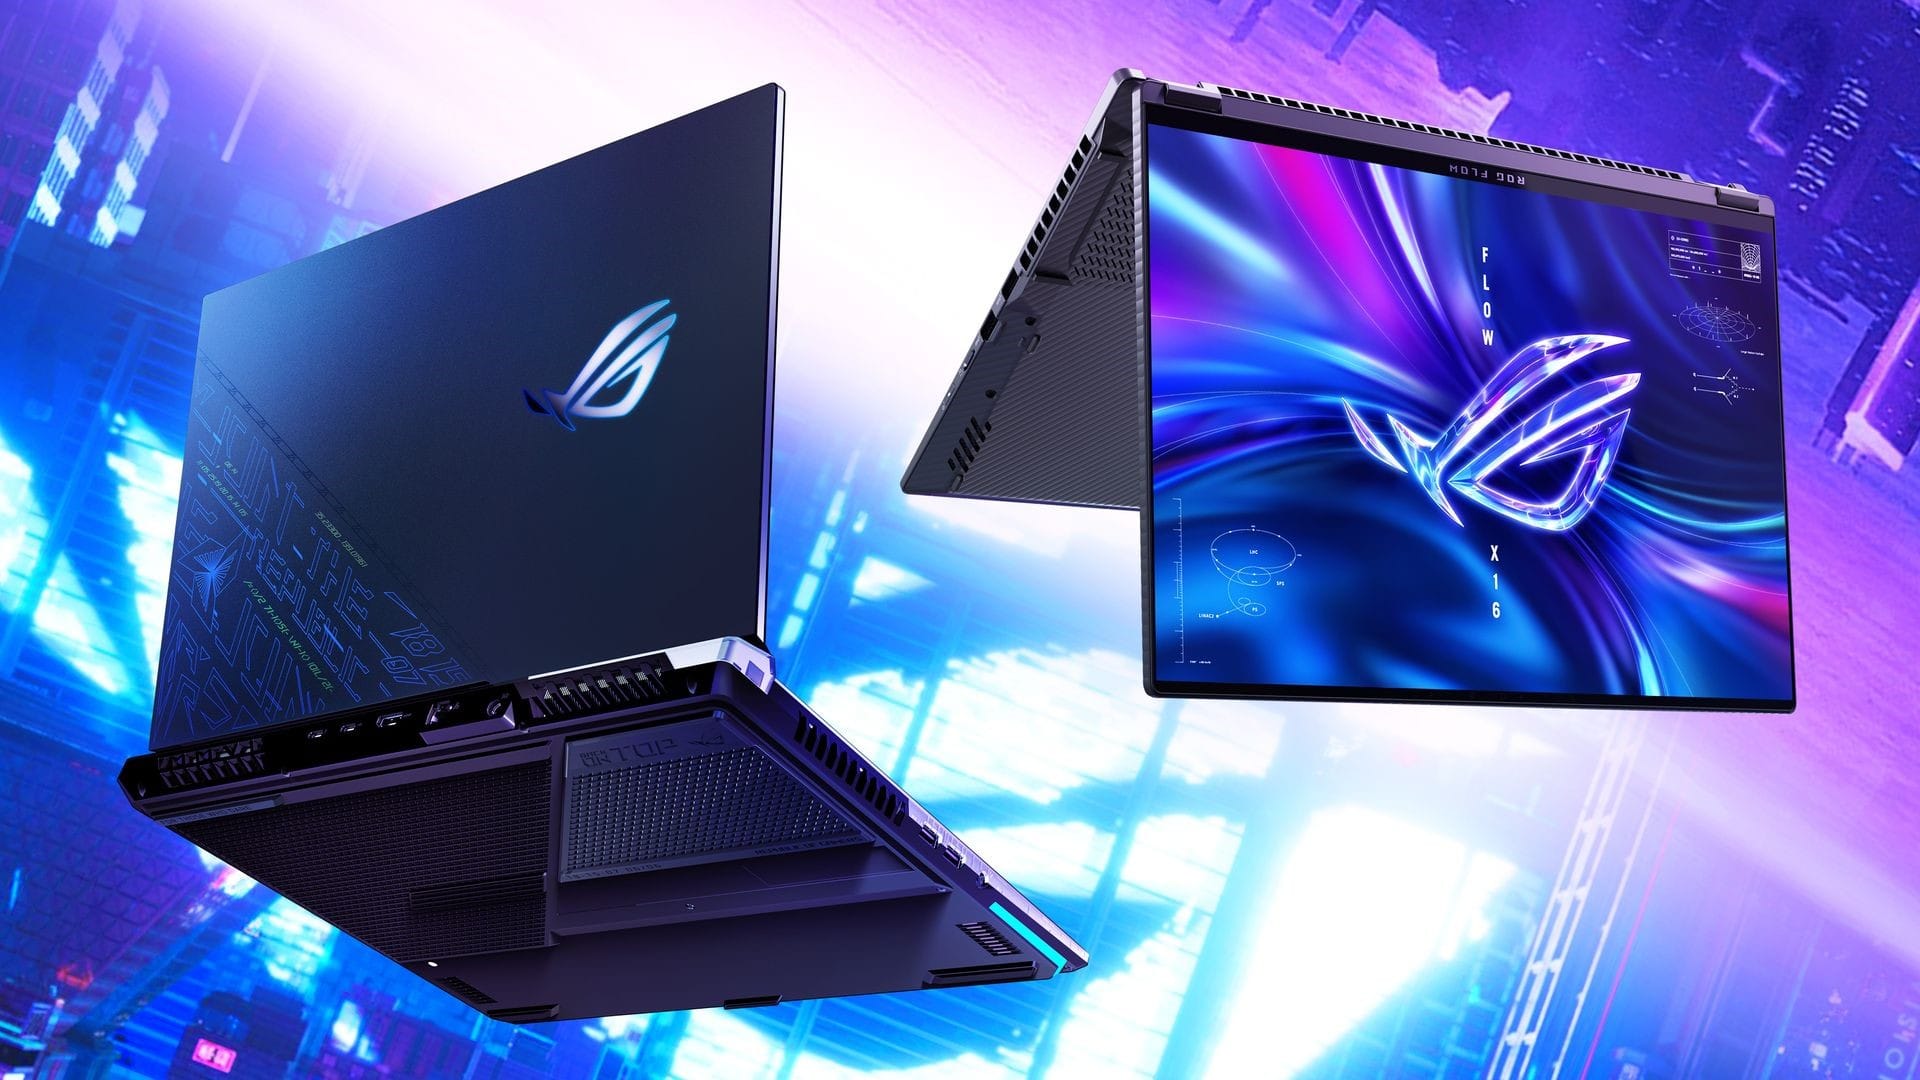 01 ROG launches 2 new gaming laptops at For Those Who Dare Boundless virtual event MMOSITE - Thông tin công nghệ, review, thủ thuật PC, gaming